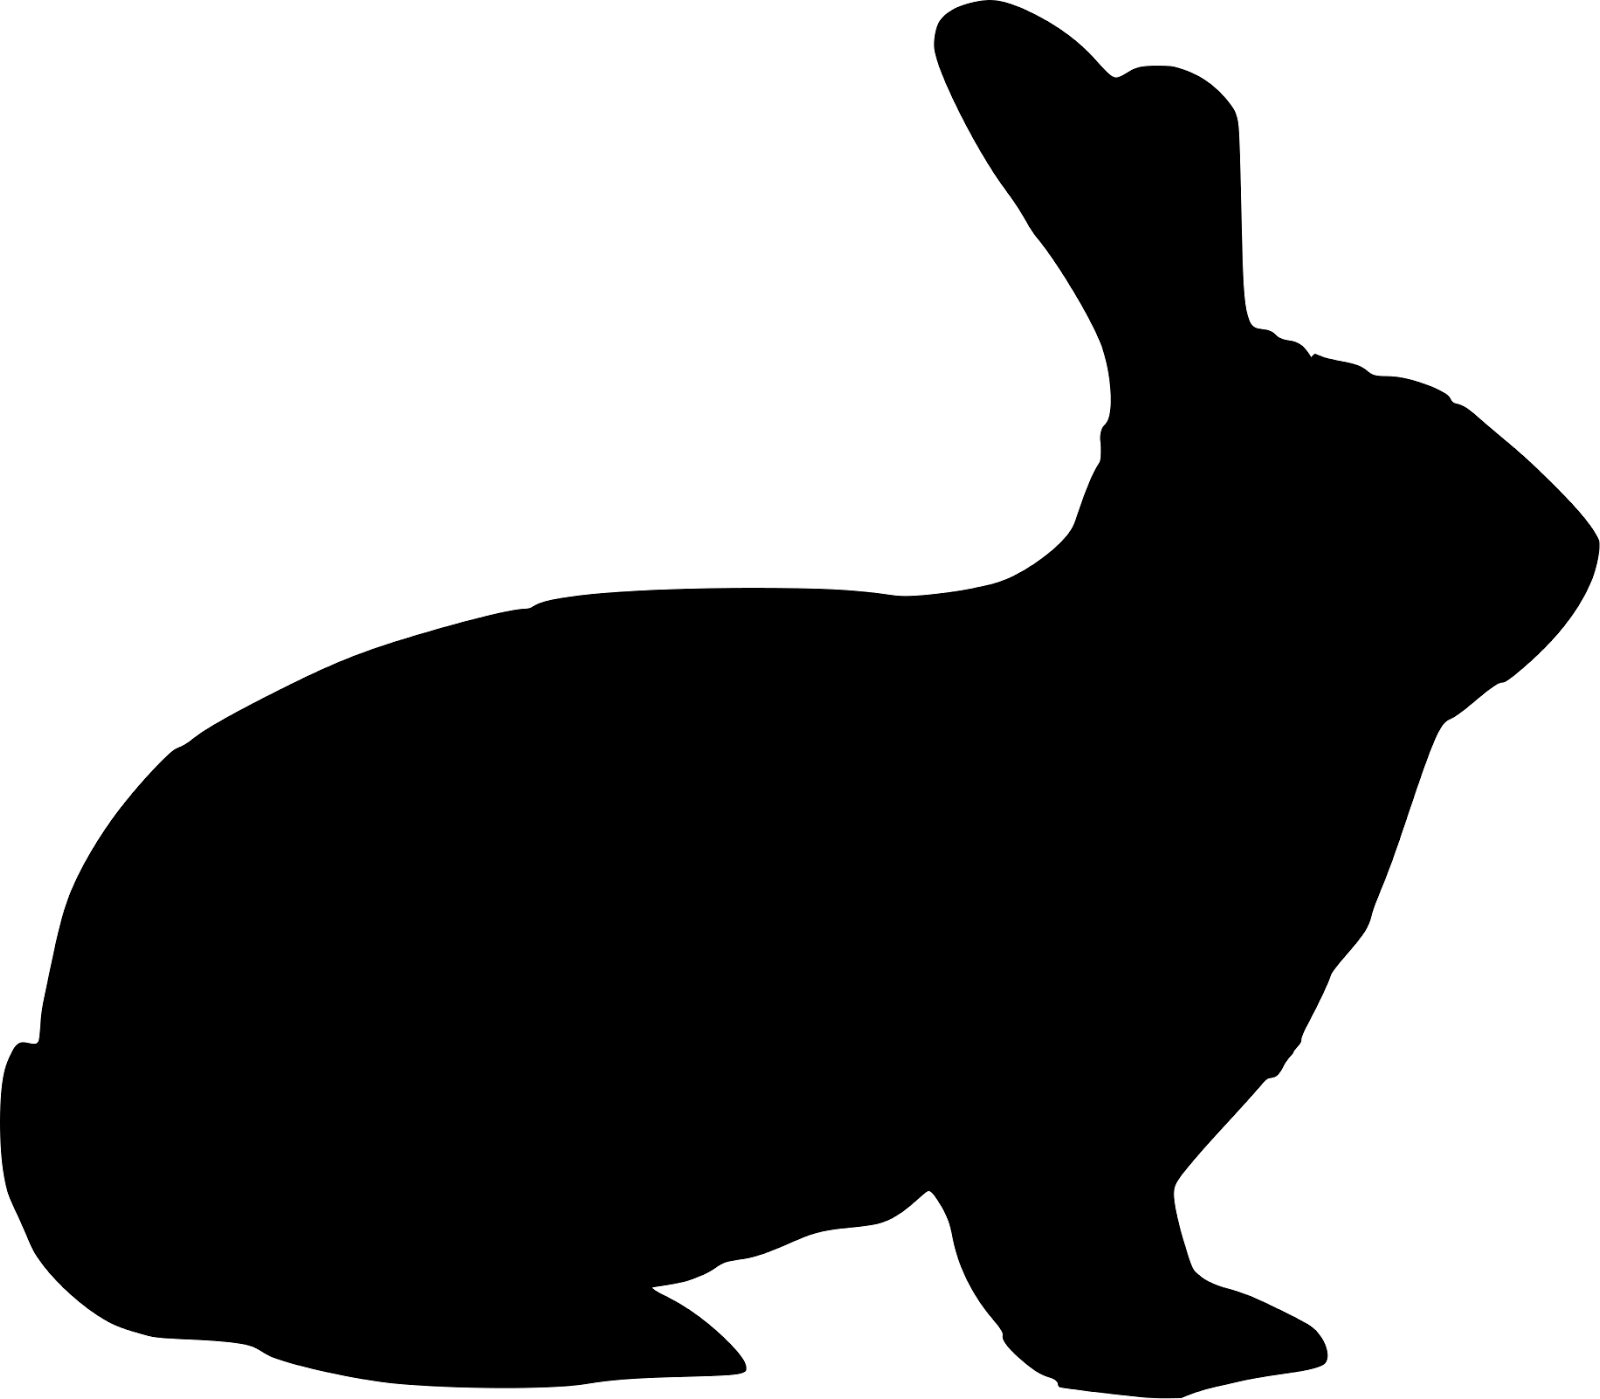 Bunny Silhouette Vector - ClipArt Best